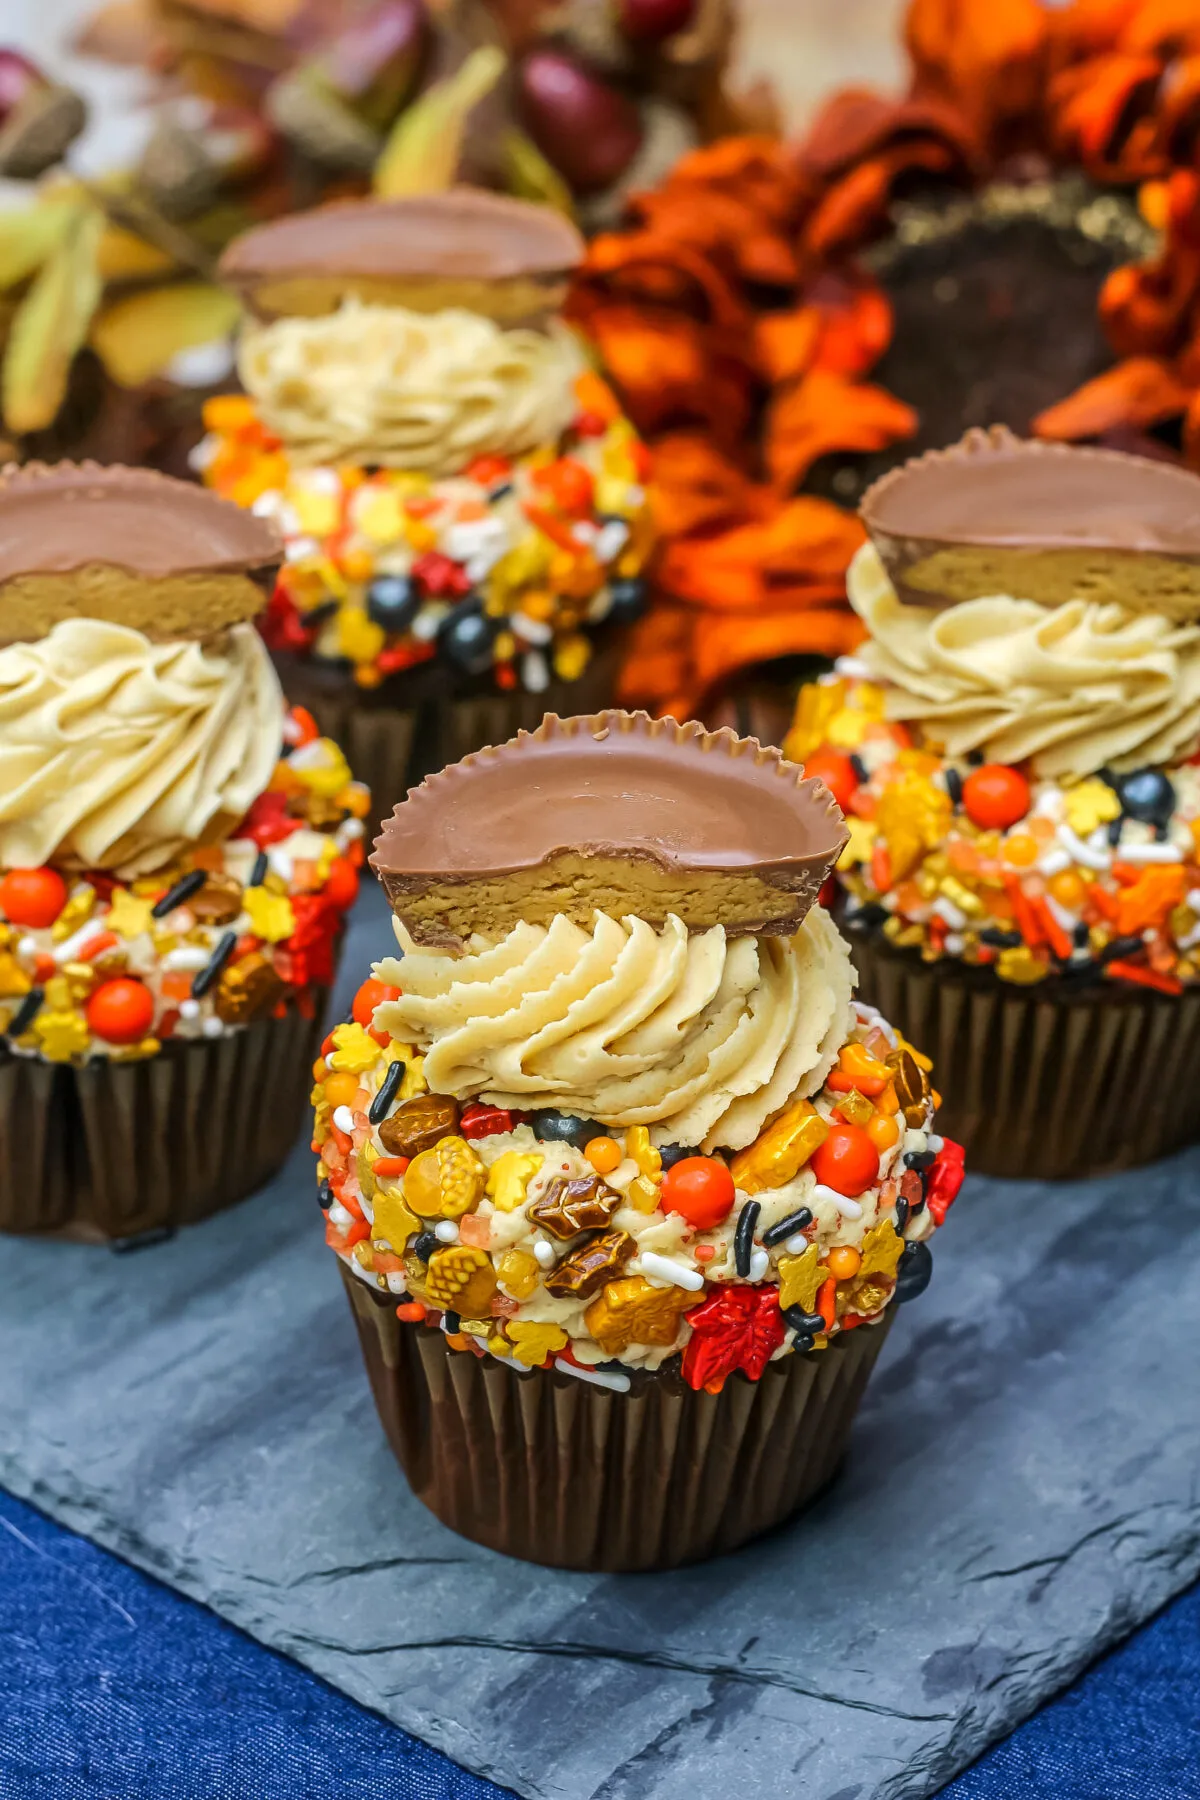 This chocolate cupcakes with peanut butter frosting recipe features a rich chocolate cake, creamy frosting, cute sprinkles and a Reese’s cup.